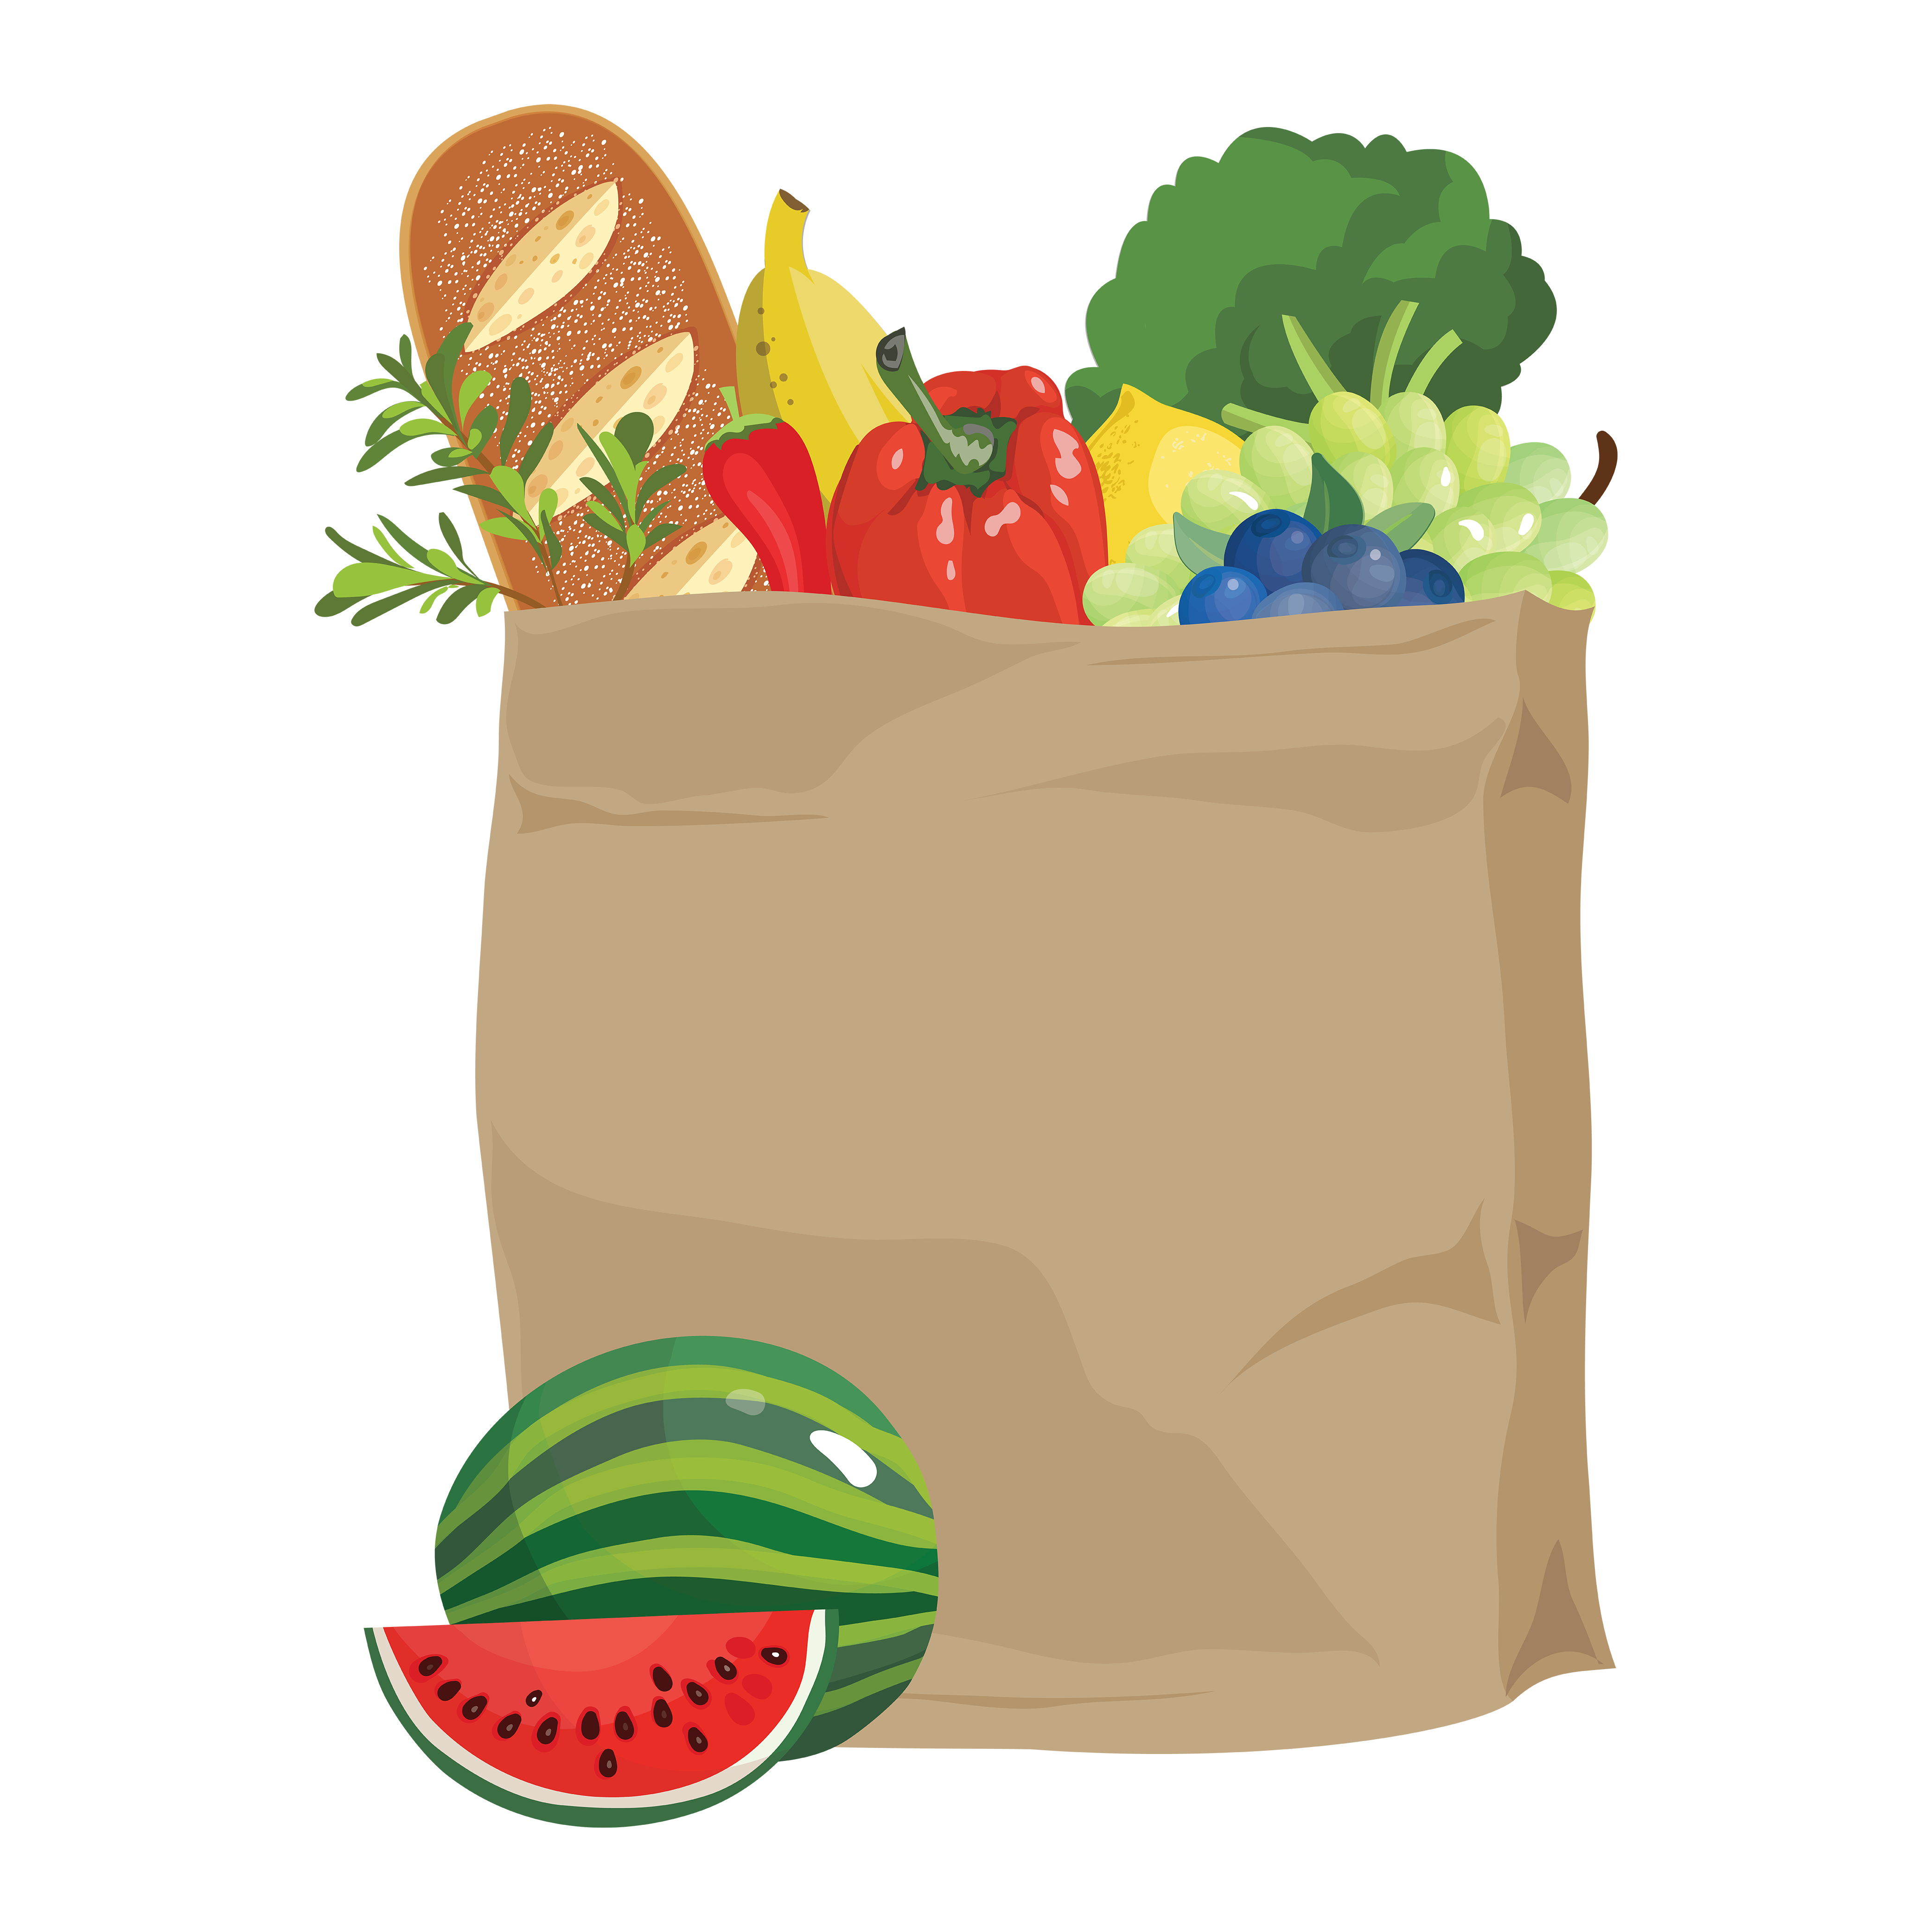 Grocery bag filled with fruits, veggies, and whole grains.